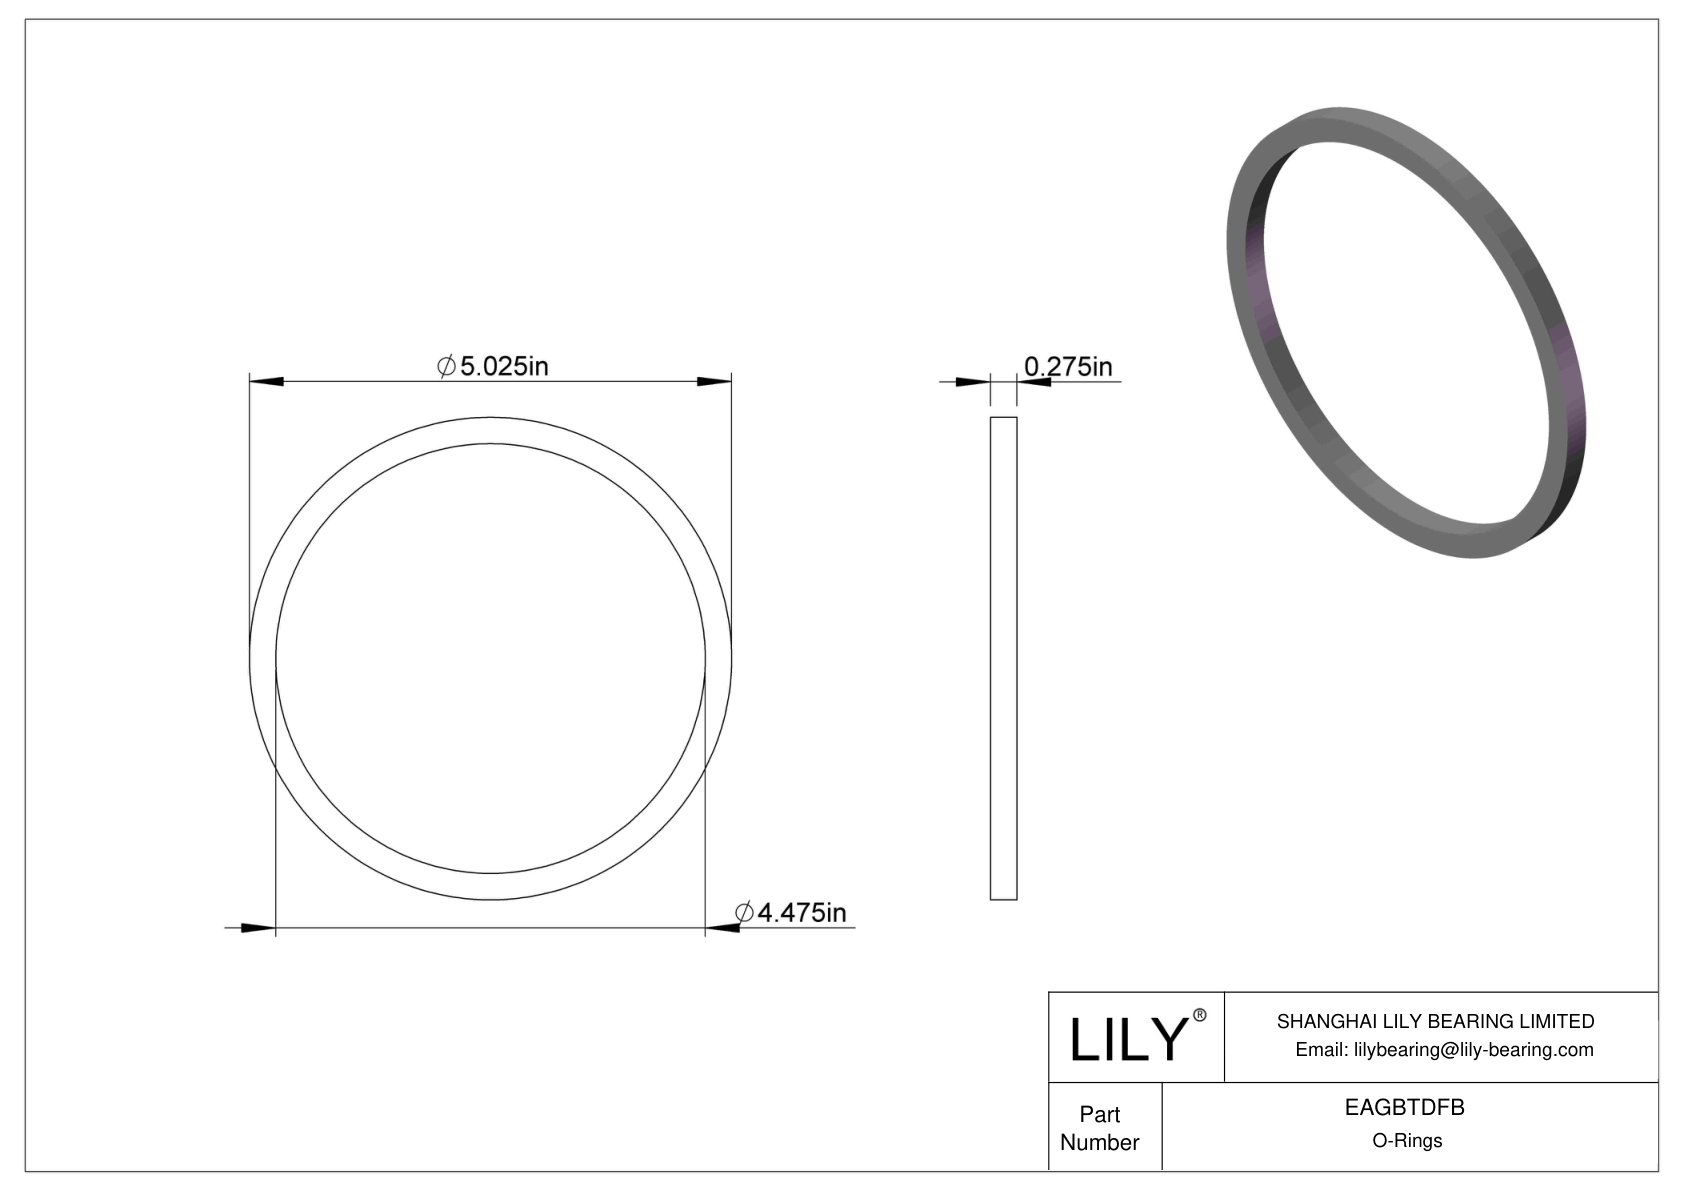 EAGBTDFB Oil Resistant O-Rings Square cad drawing